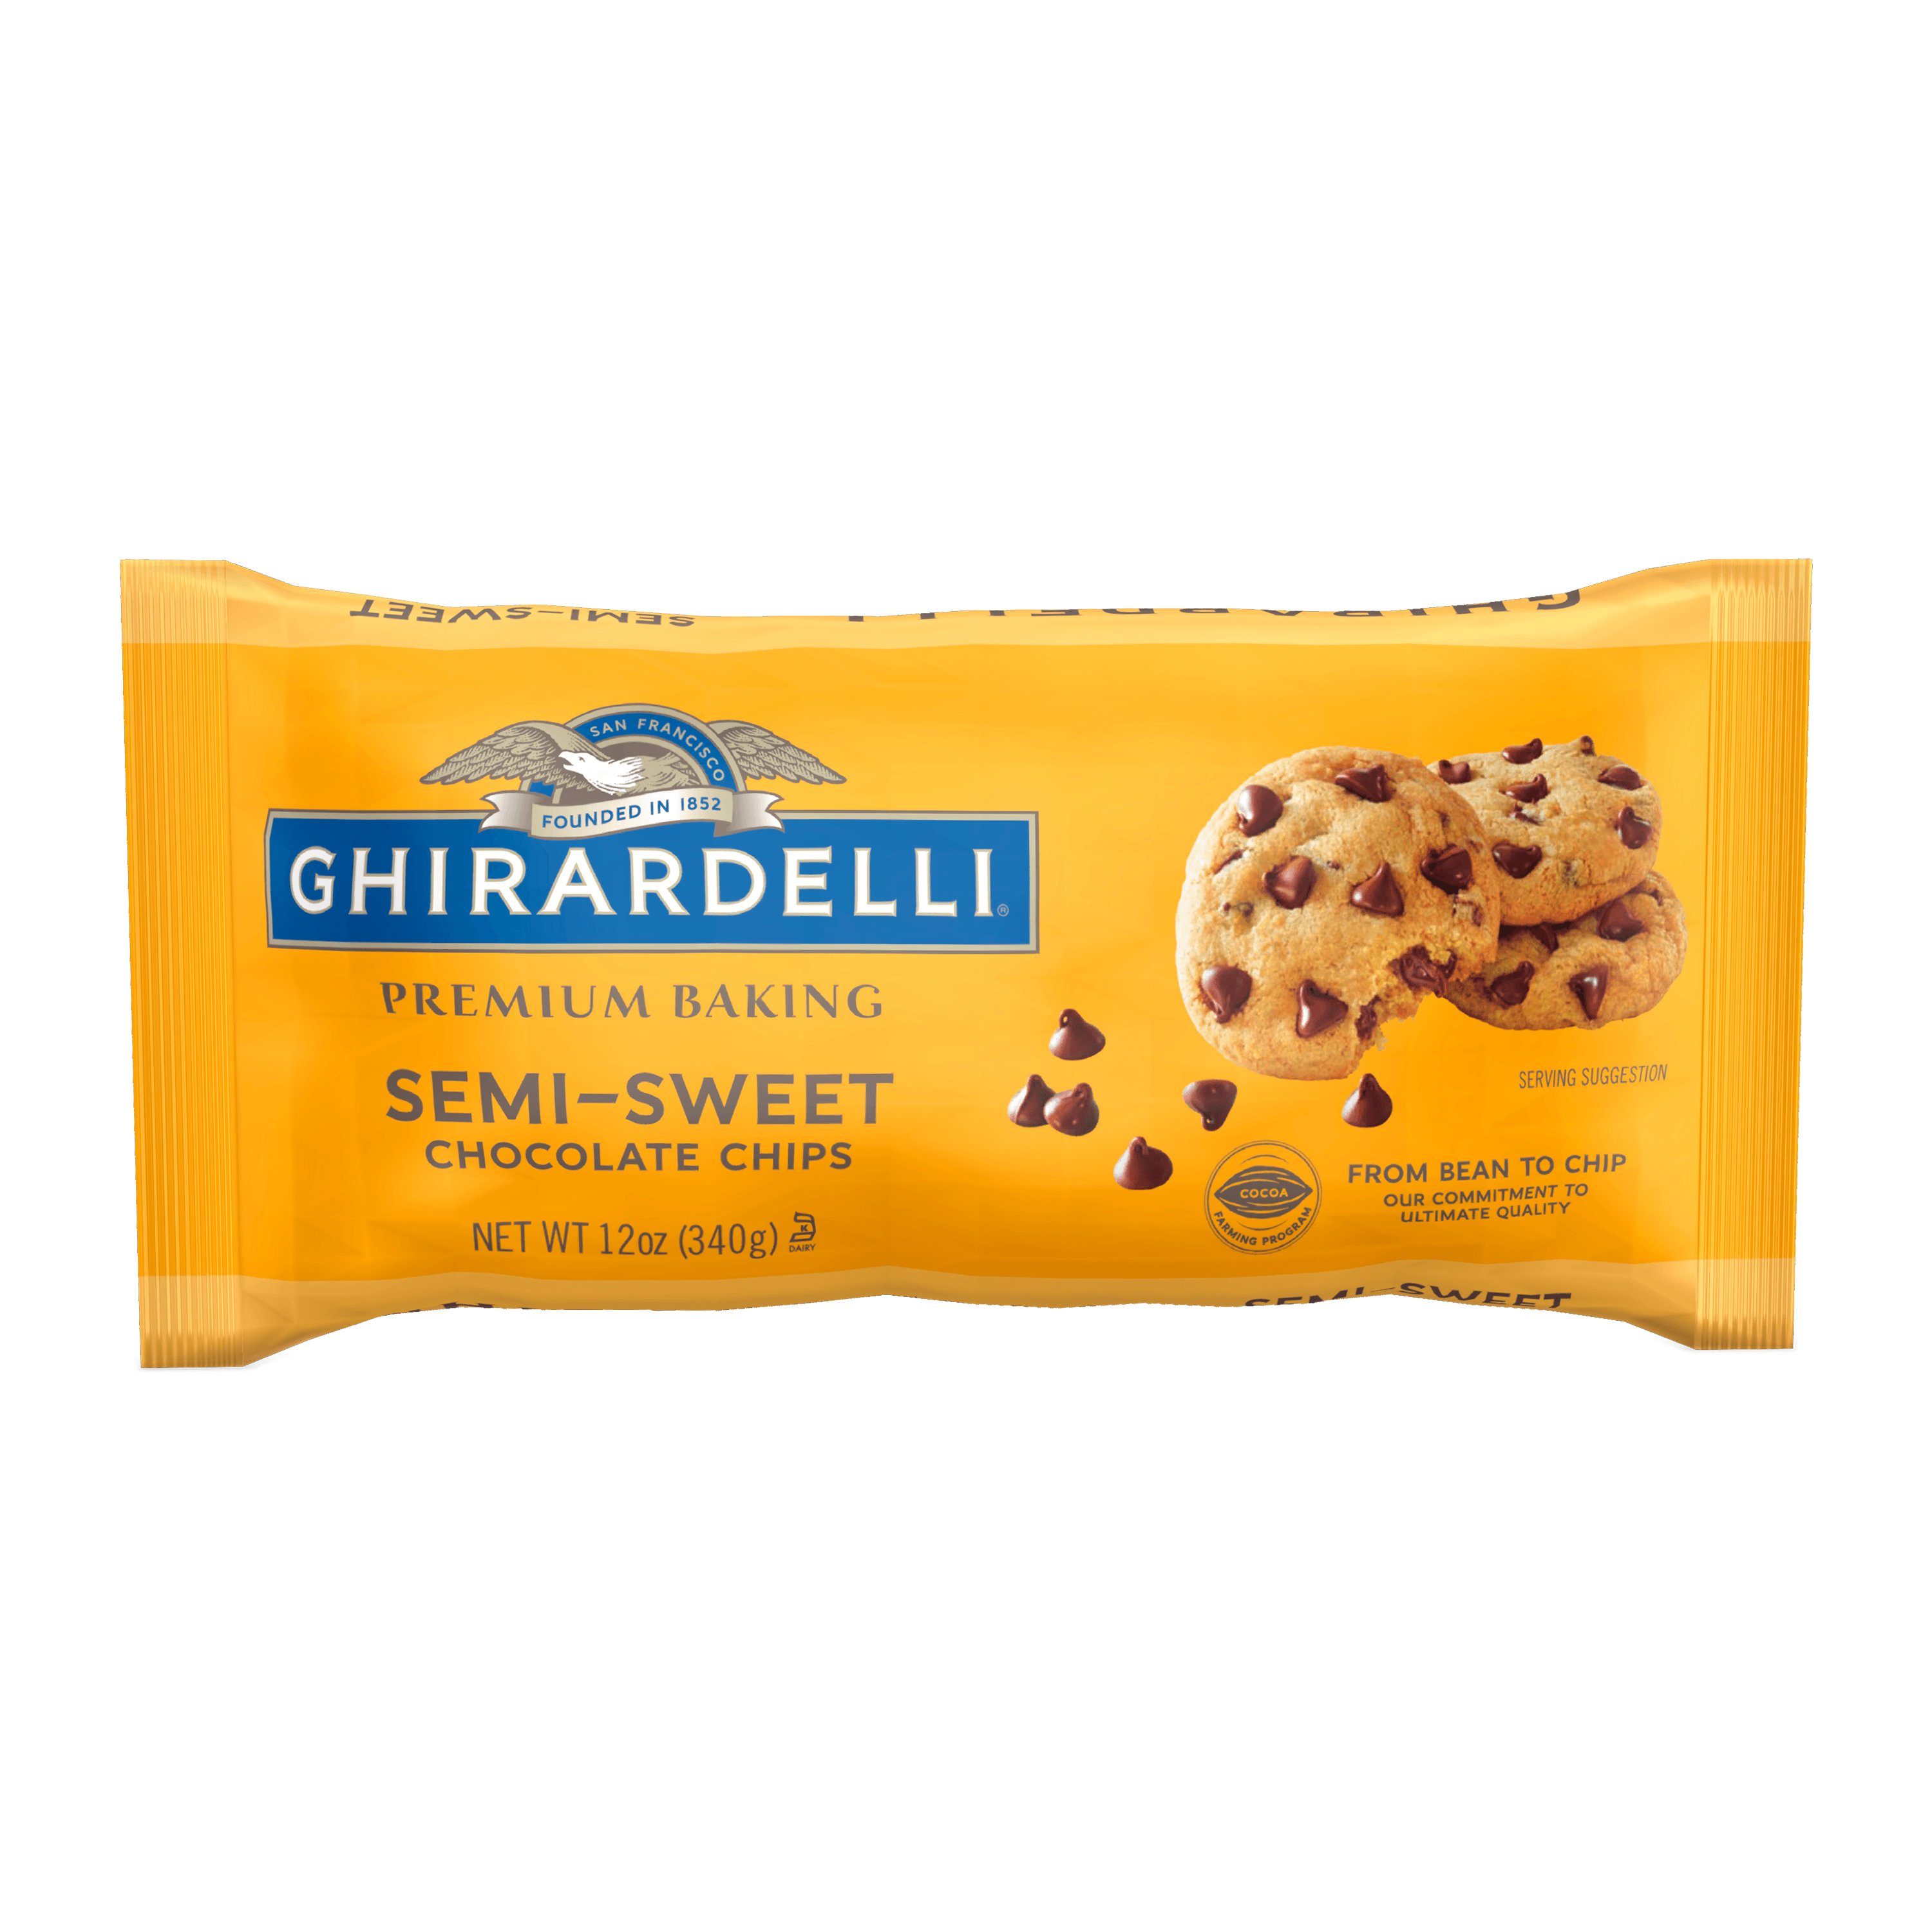 Ghirardelli Semi Sweet Chocolate Premium Baking Chips Shop Baking Chocolate Candies At H E B,What Does An Ionizer Do To Water